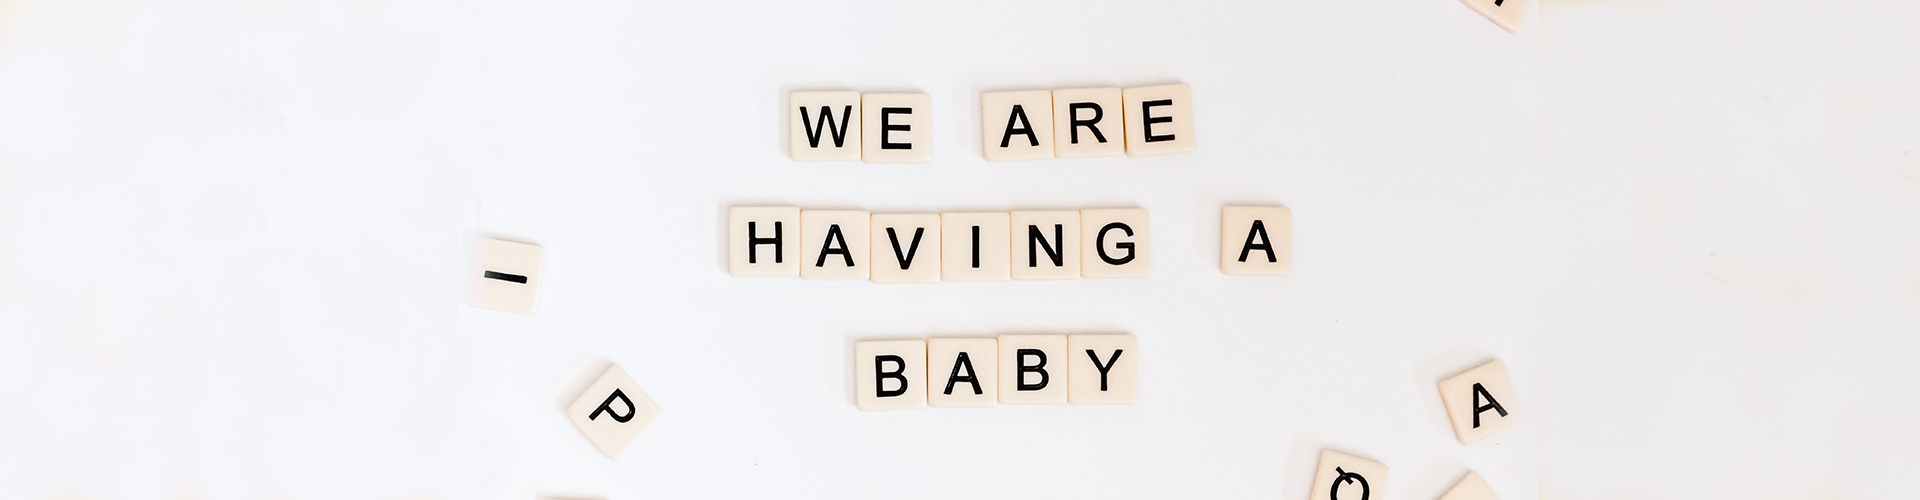 Header_We-are-having-a-baby_1920x350